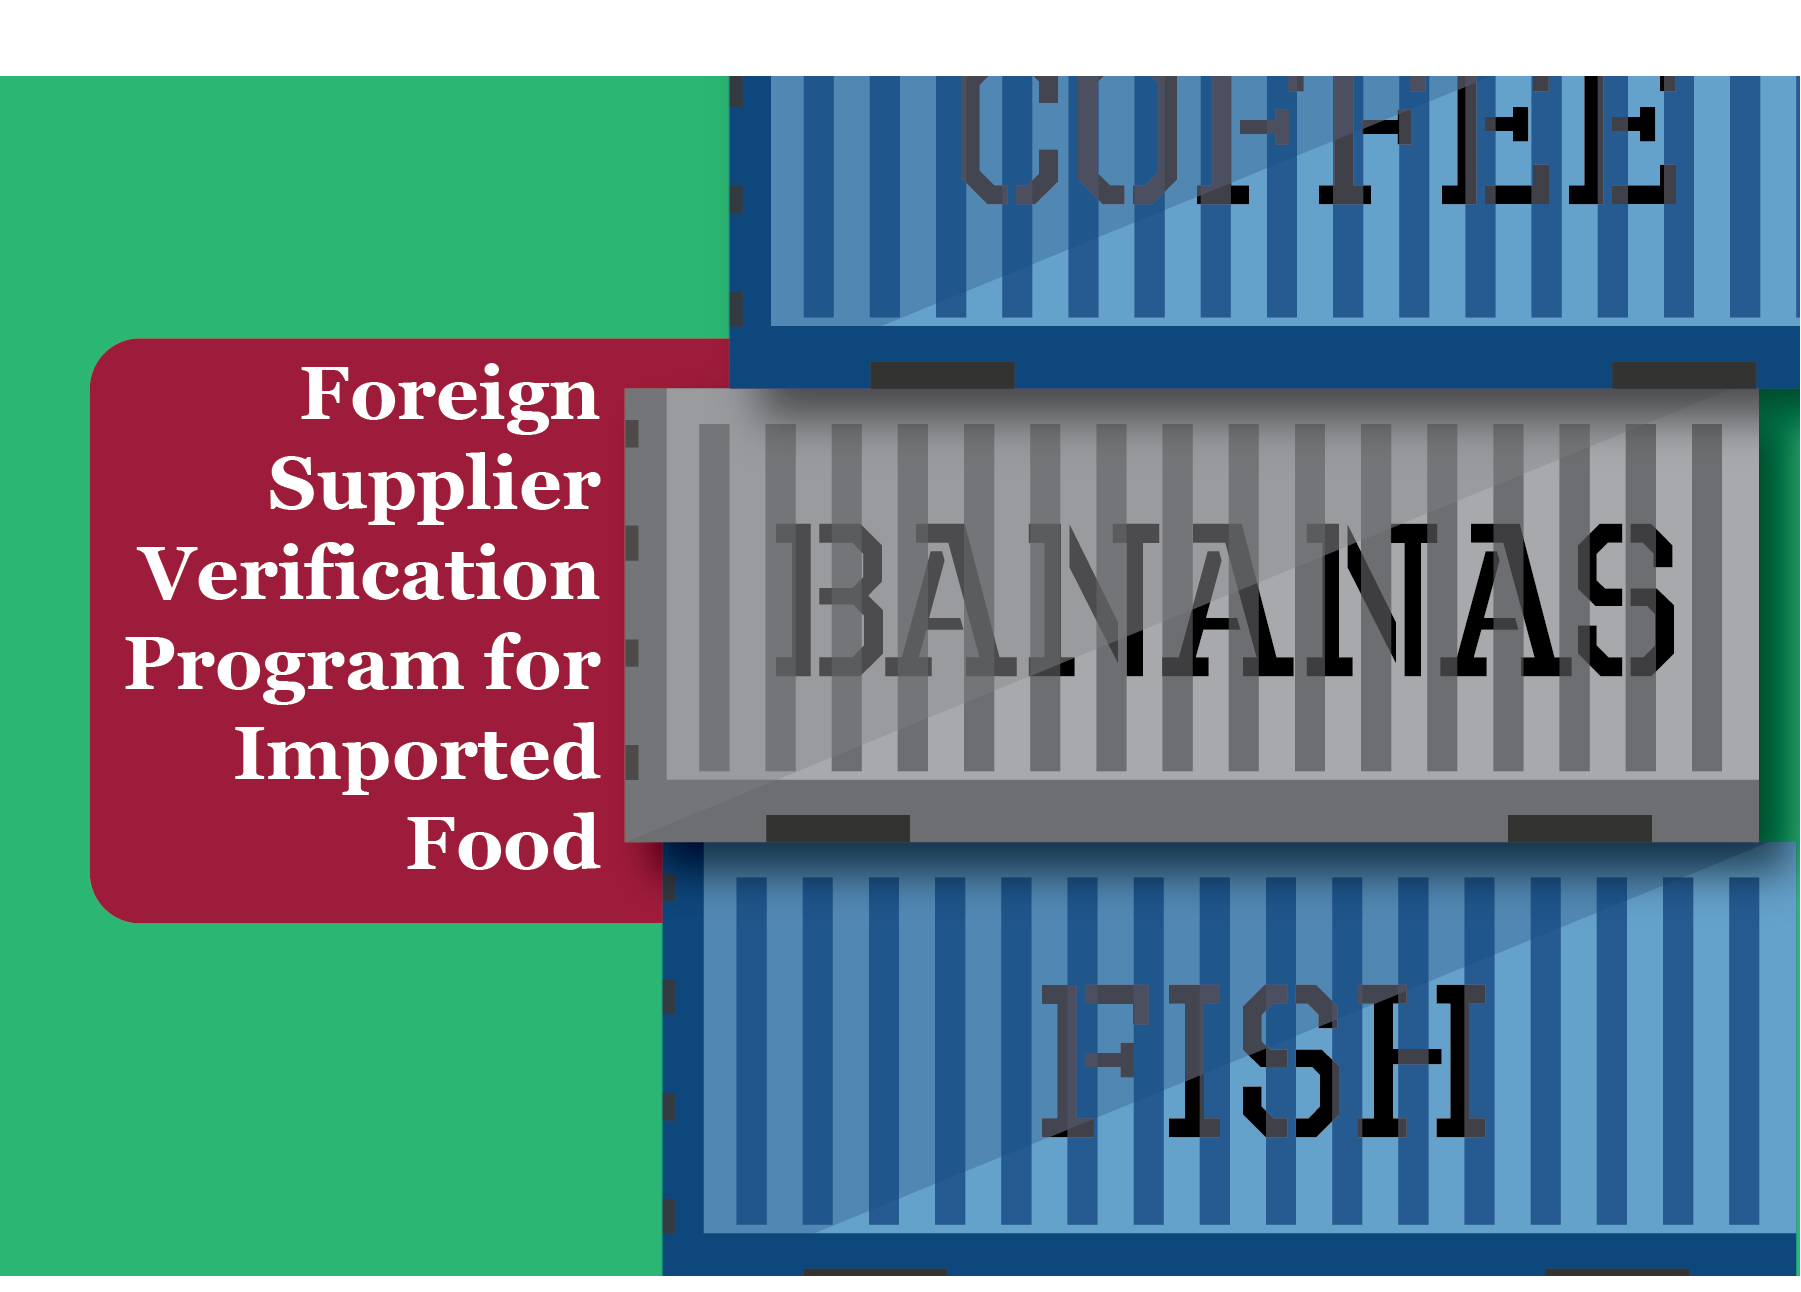 Foreign Supplier Verification Program for Imported Food